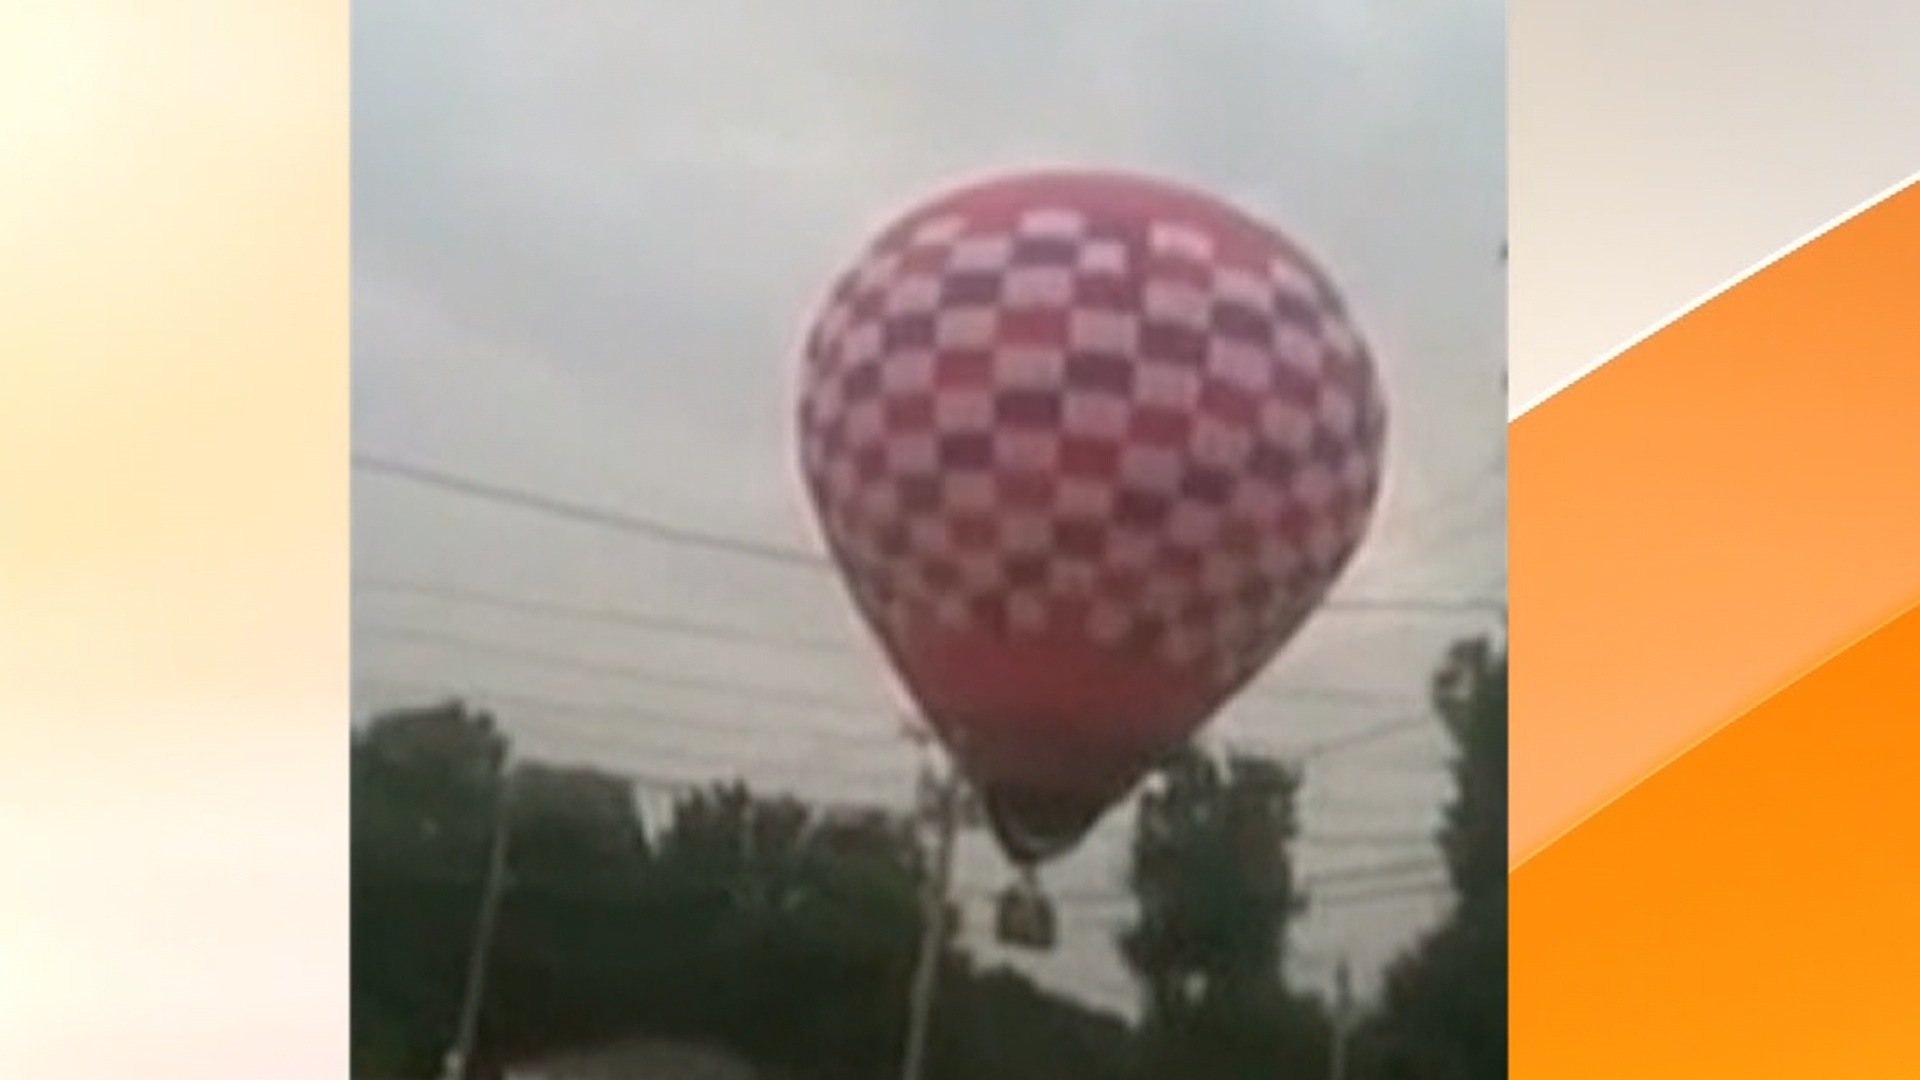 Hot air balloon crashes into power lines - TODAY.com